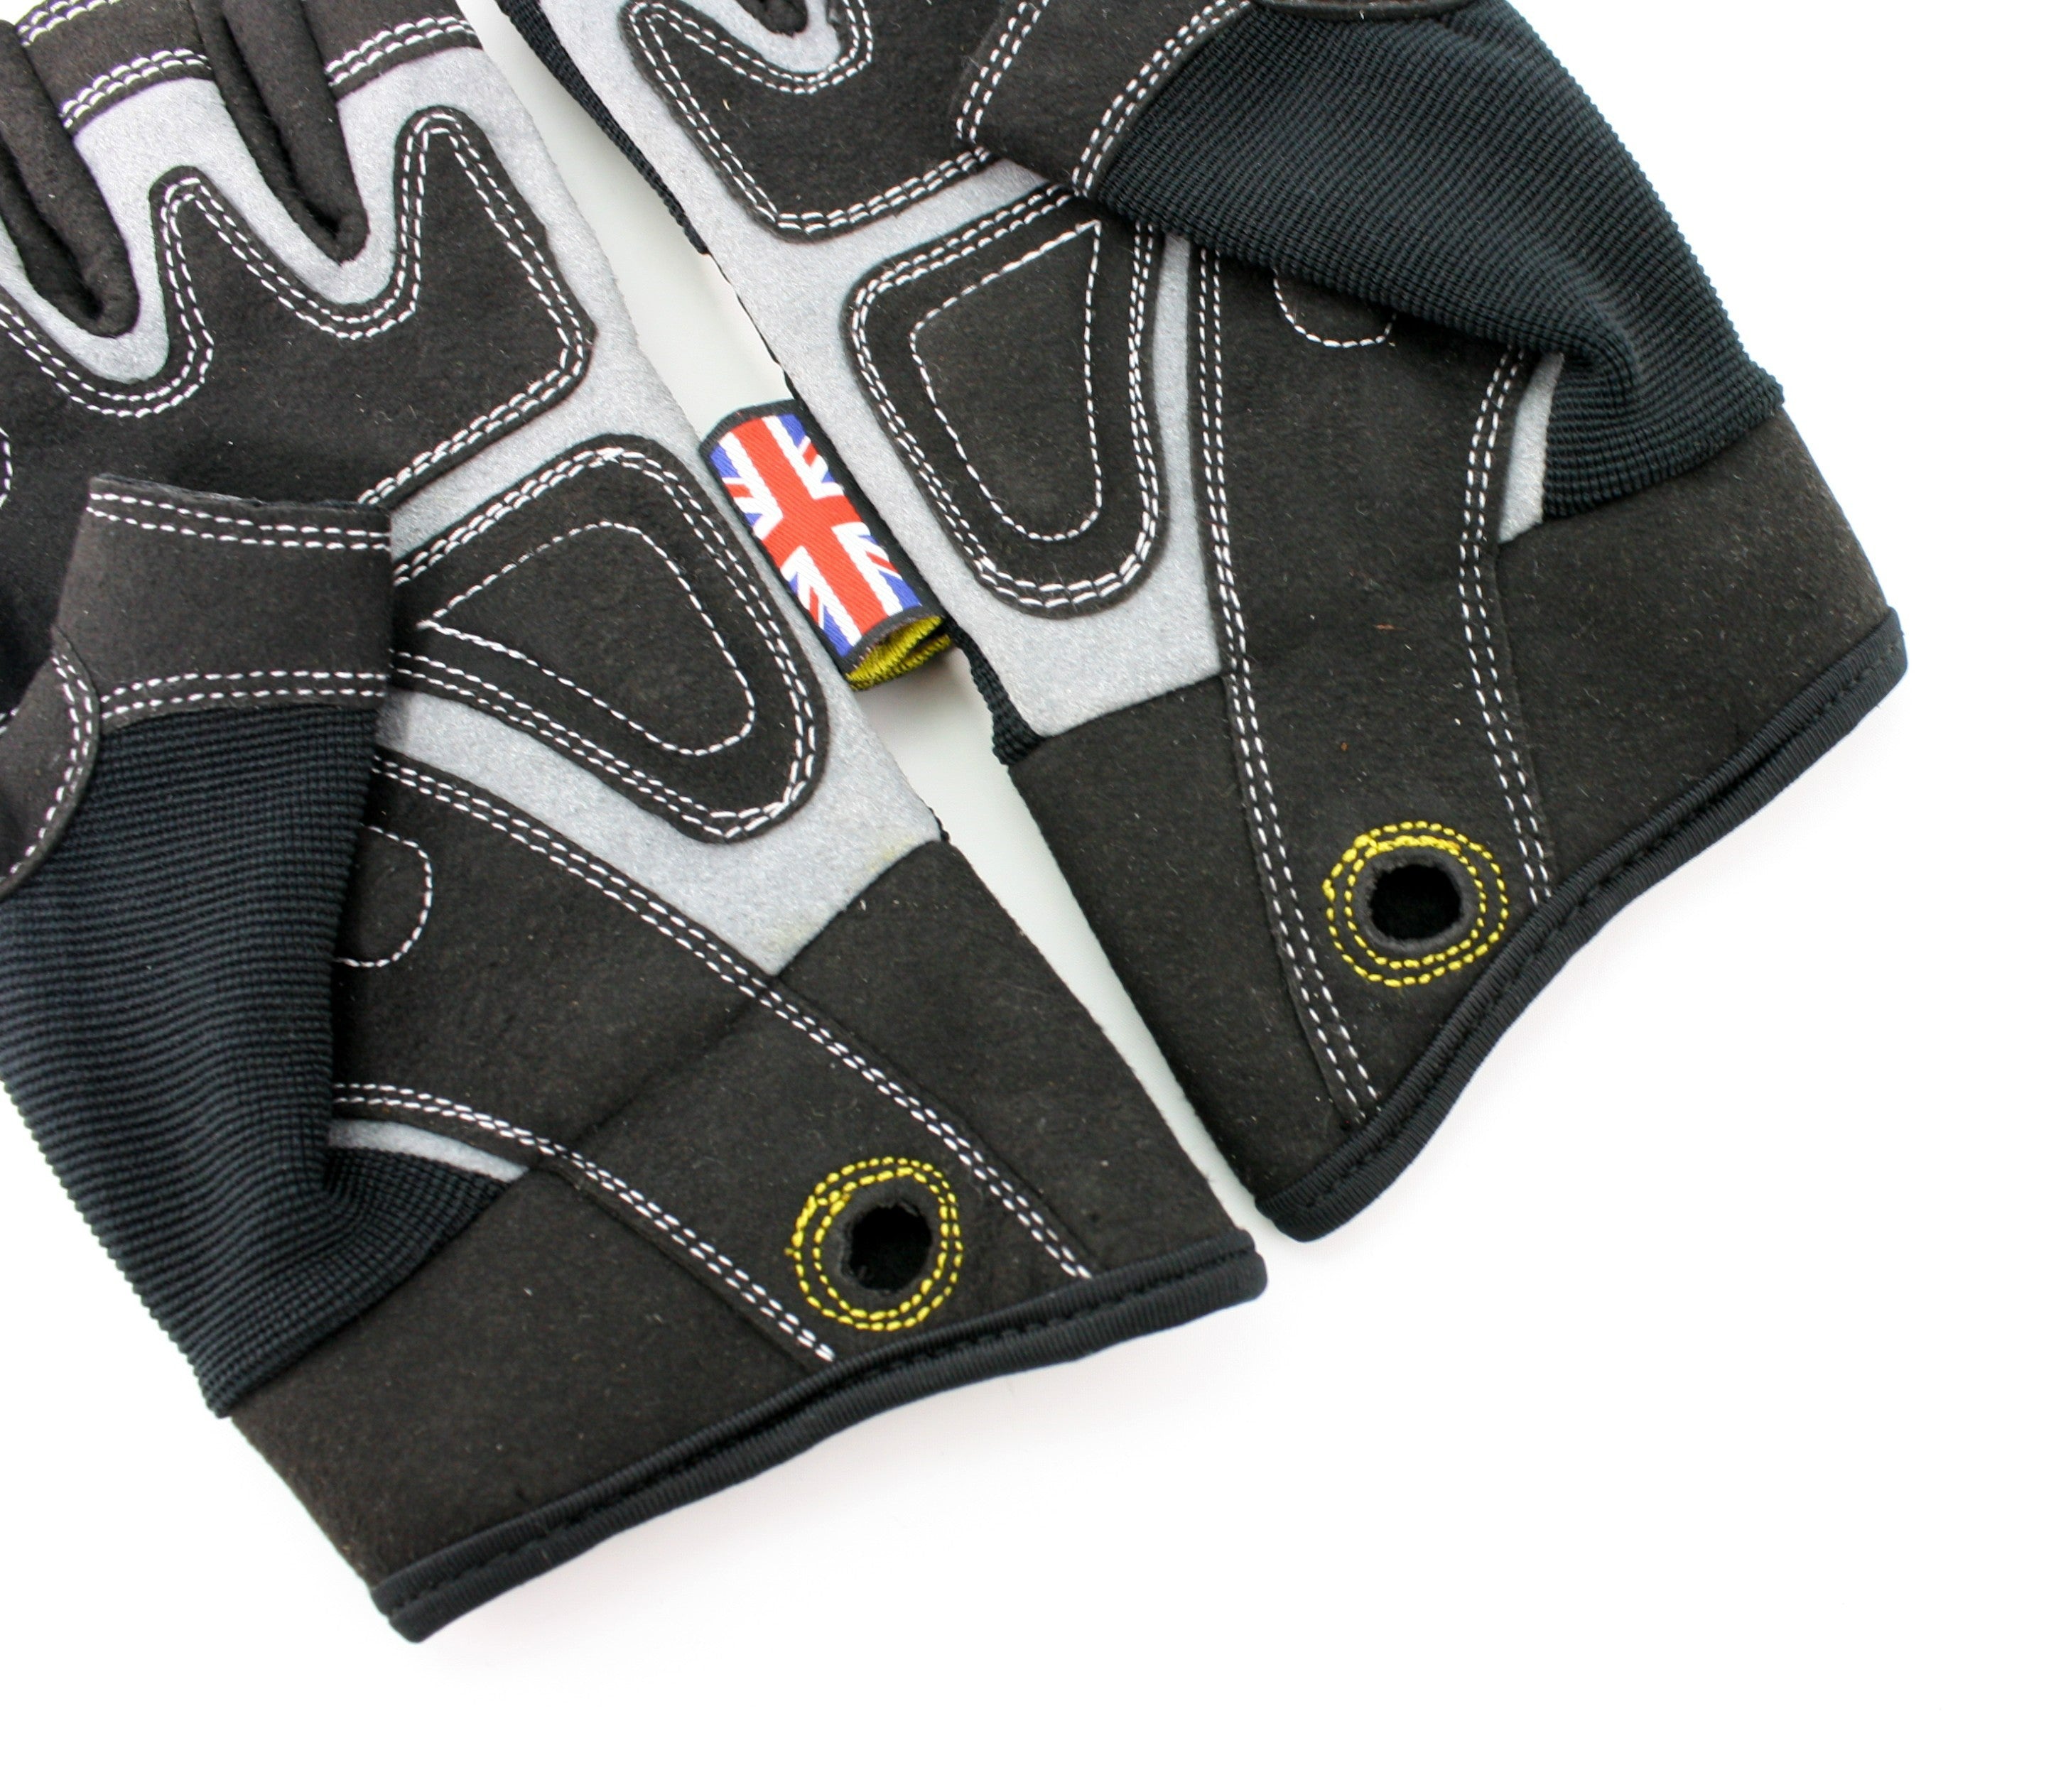 A close up of the eylet holes featured on all gloves. Handy for hanging them off your belt.